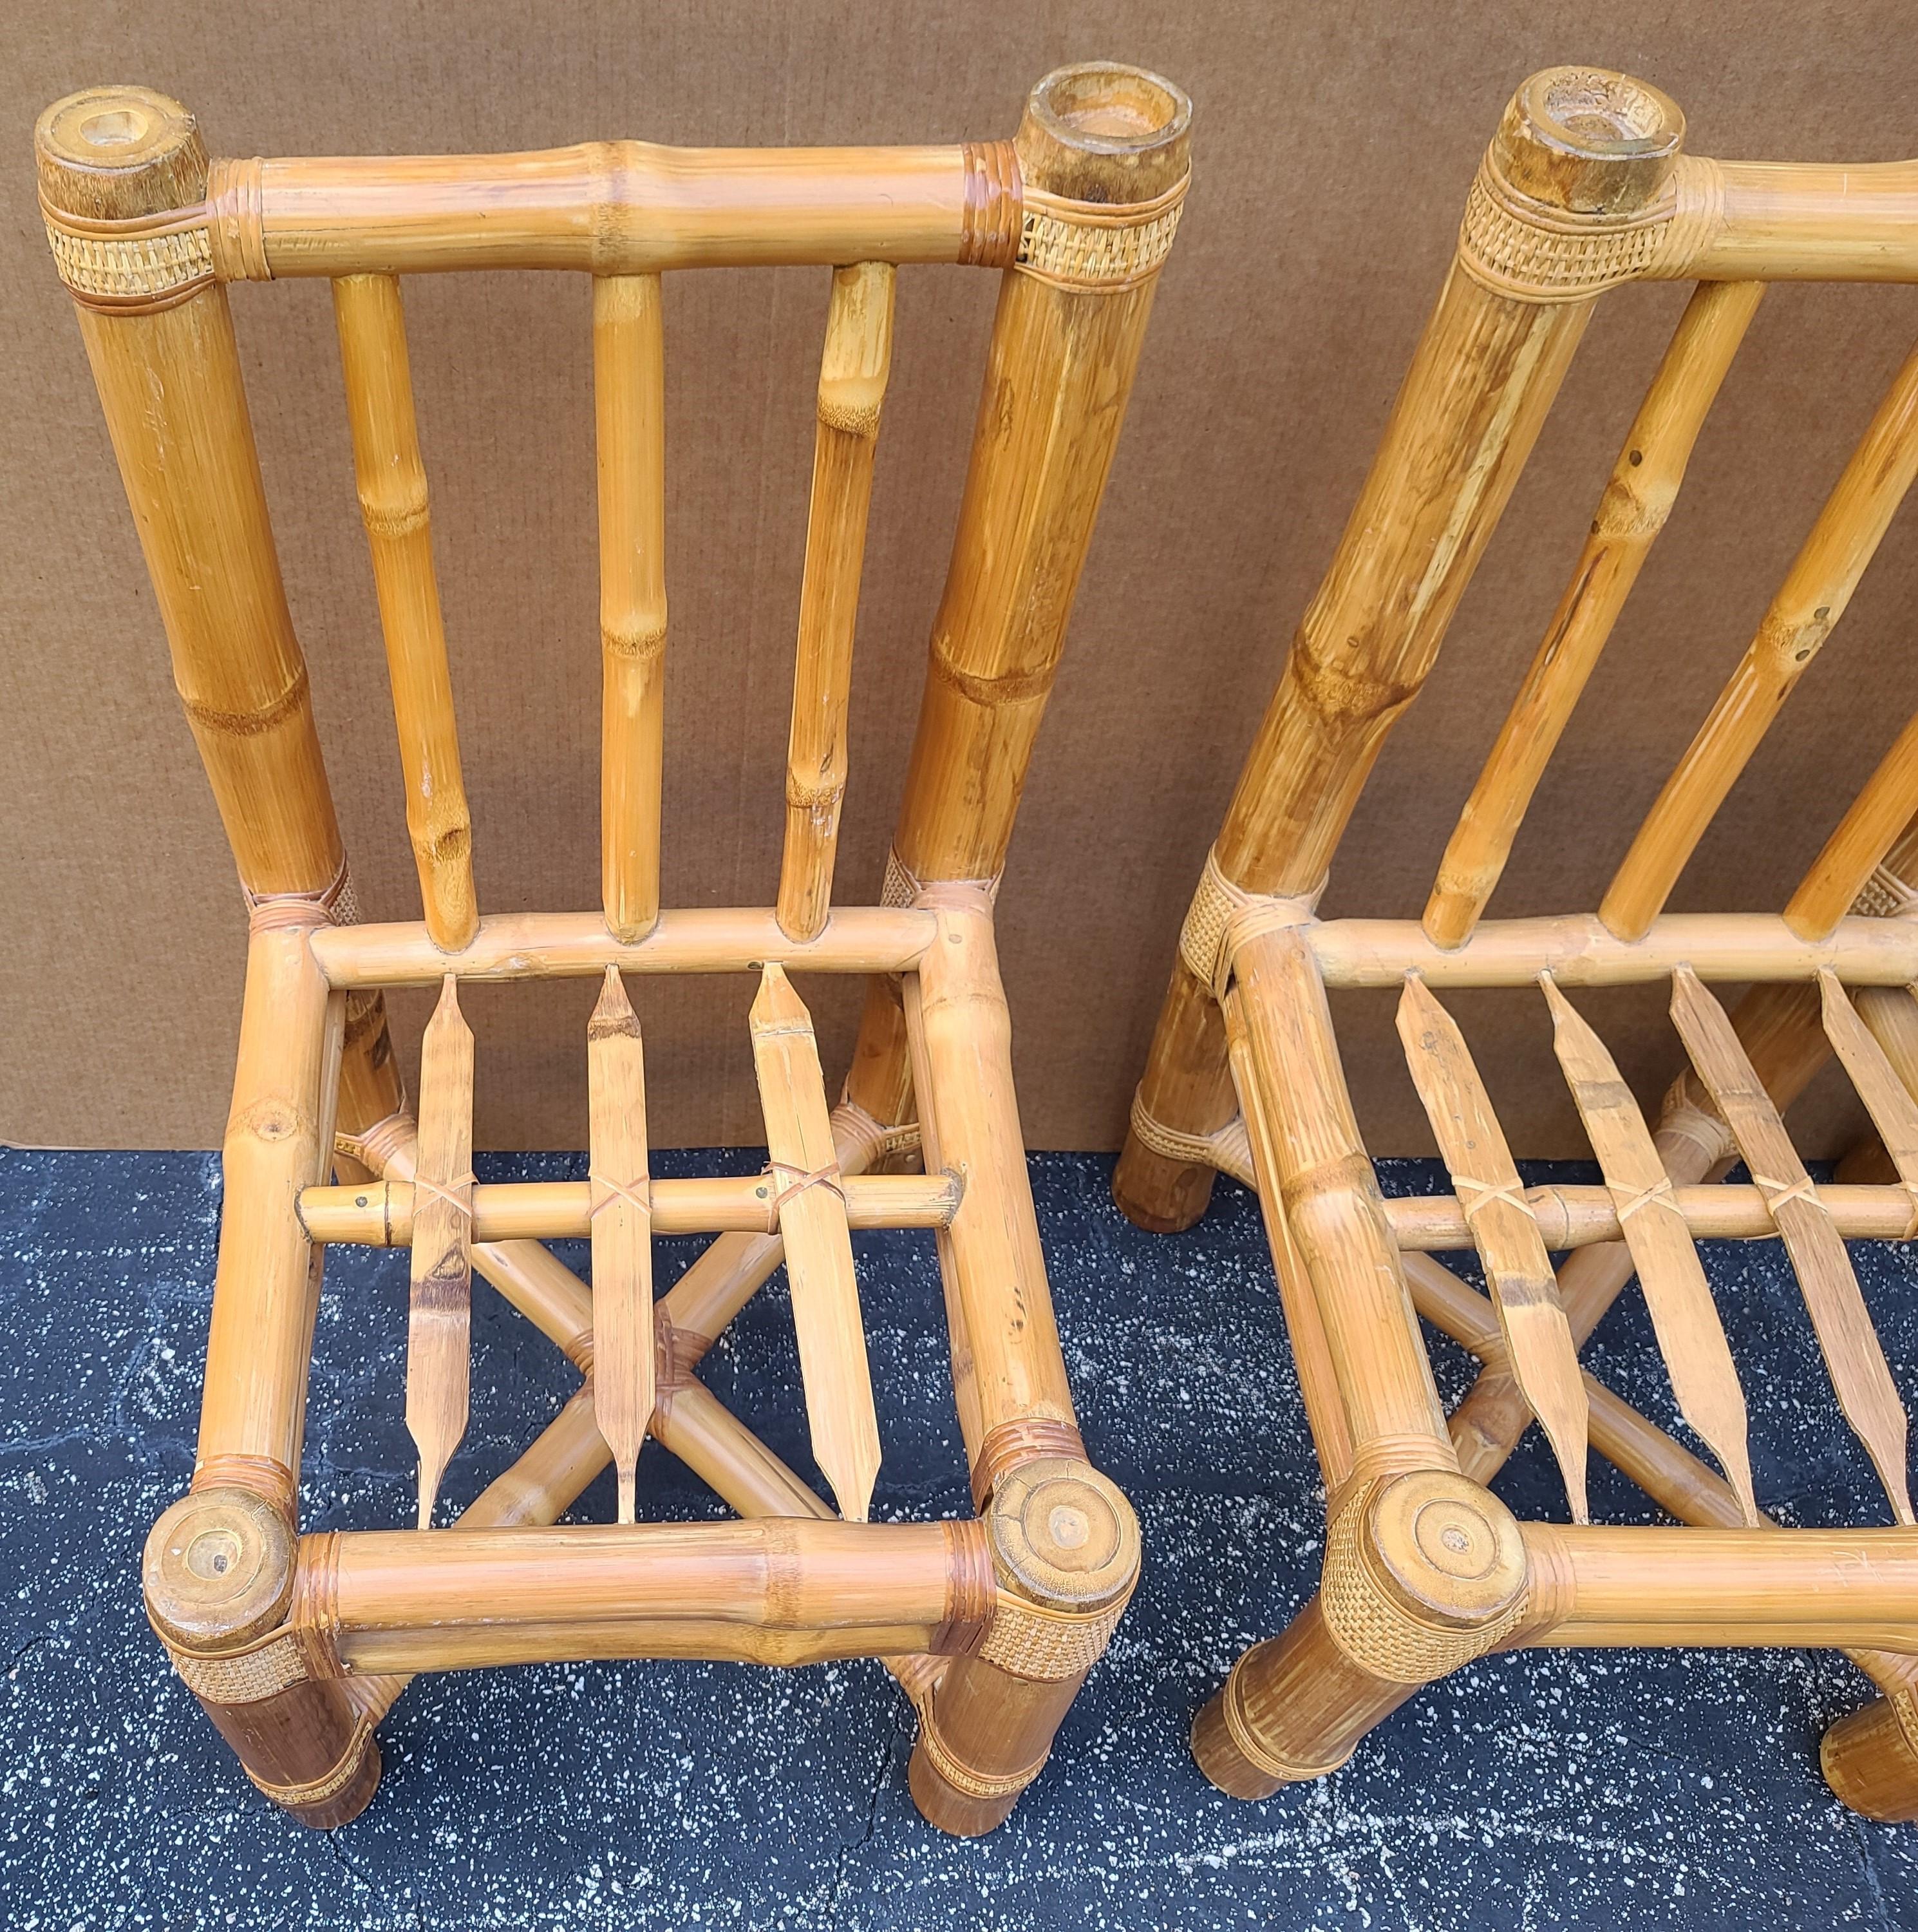 Unknown Vintage Elephant Bamboo Rattan Dining Chairs with Cushions - Set of 6 For Sale